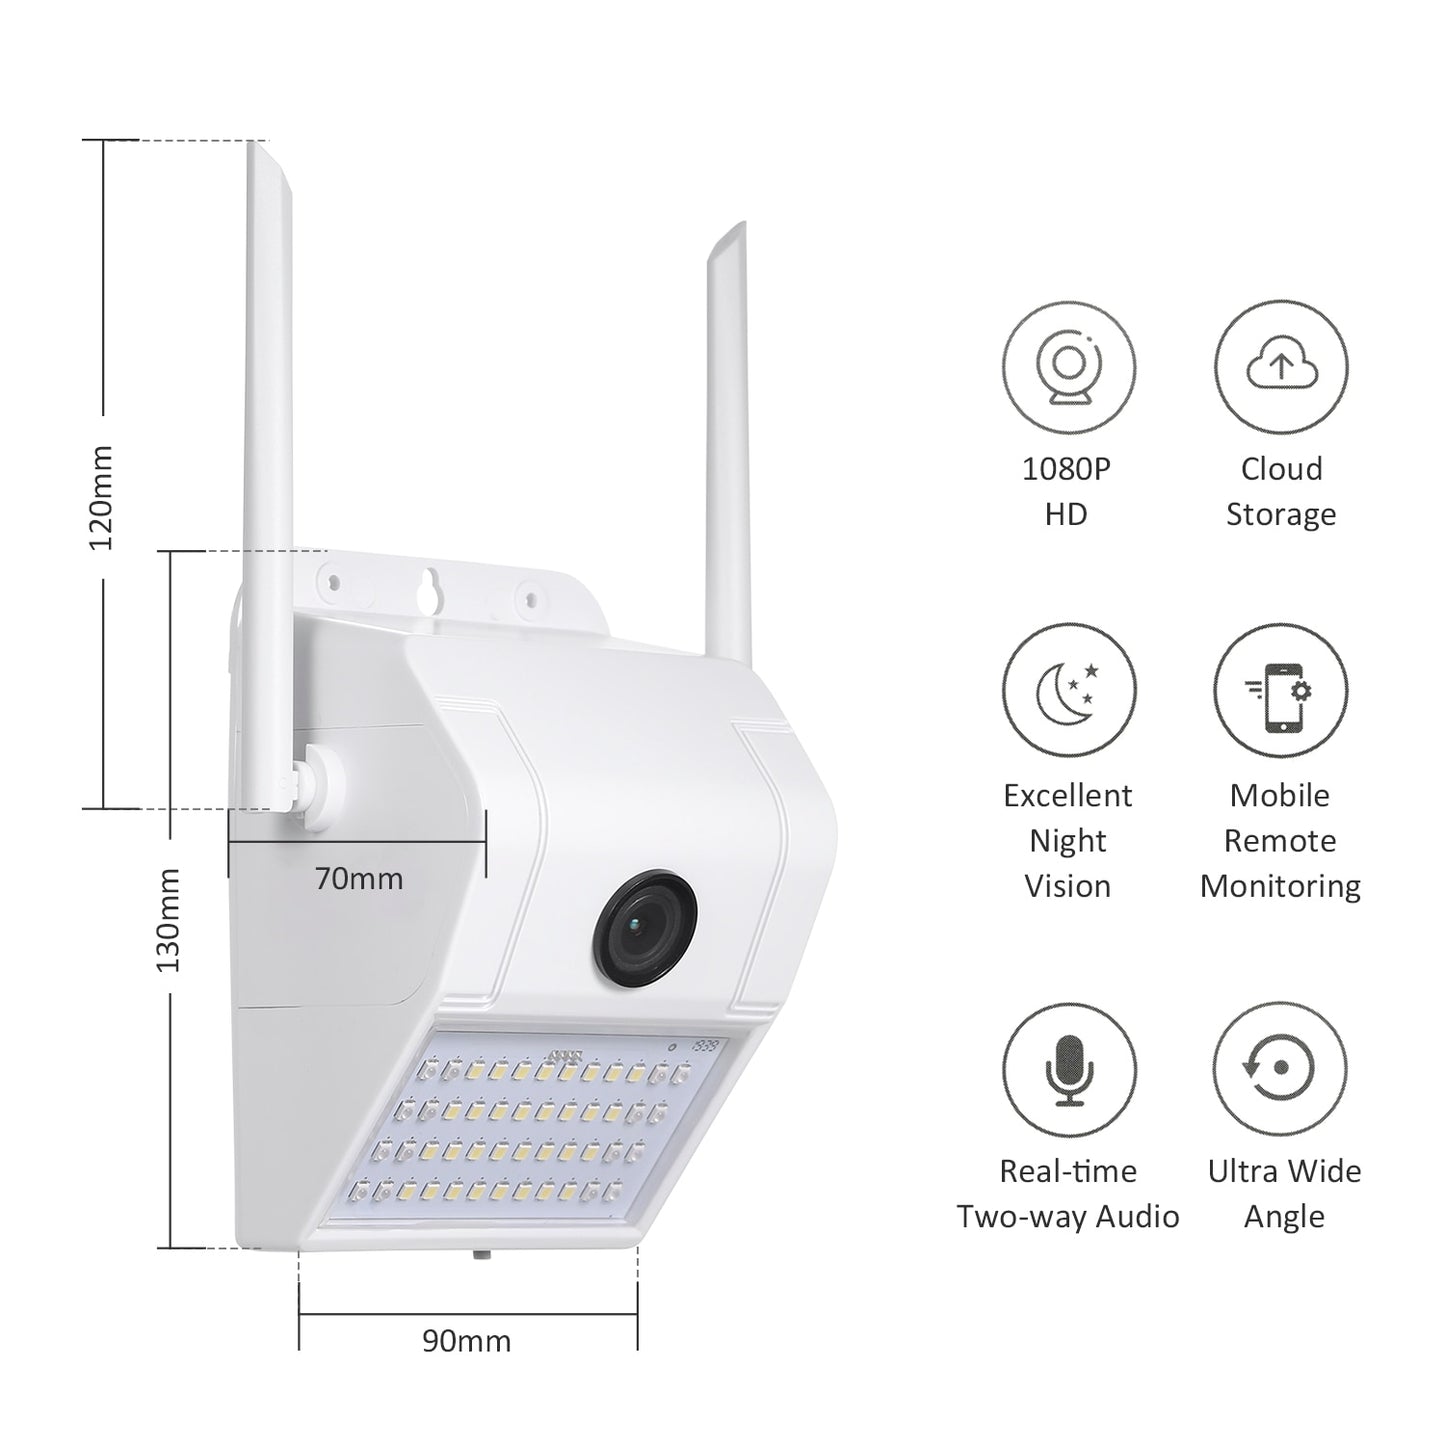 1080P Multifunctional WIFI Wireless Surveillance Outdoor Wall Light Webcam Security Camera PIR Motion Detection IP65 Waterproof - TRIPLE AAA Fashion Collection